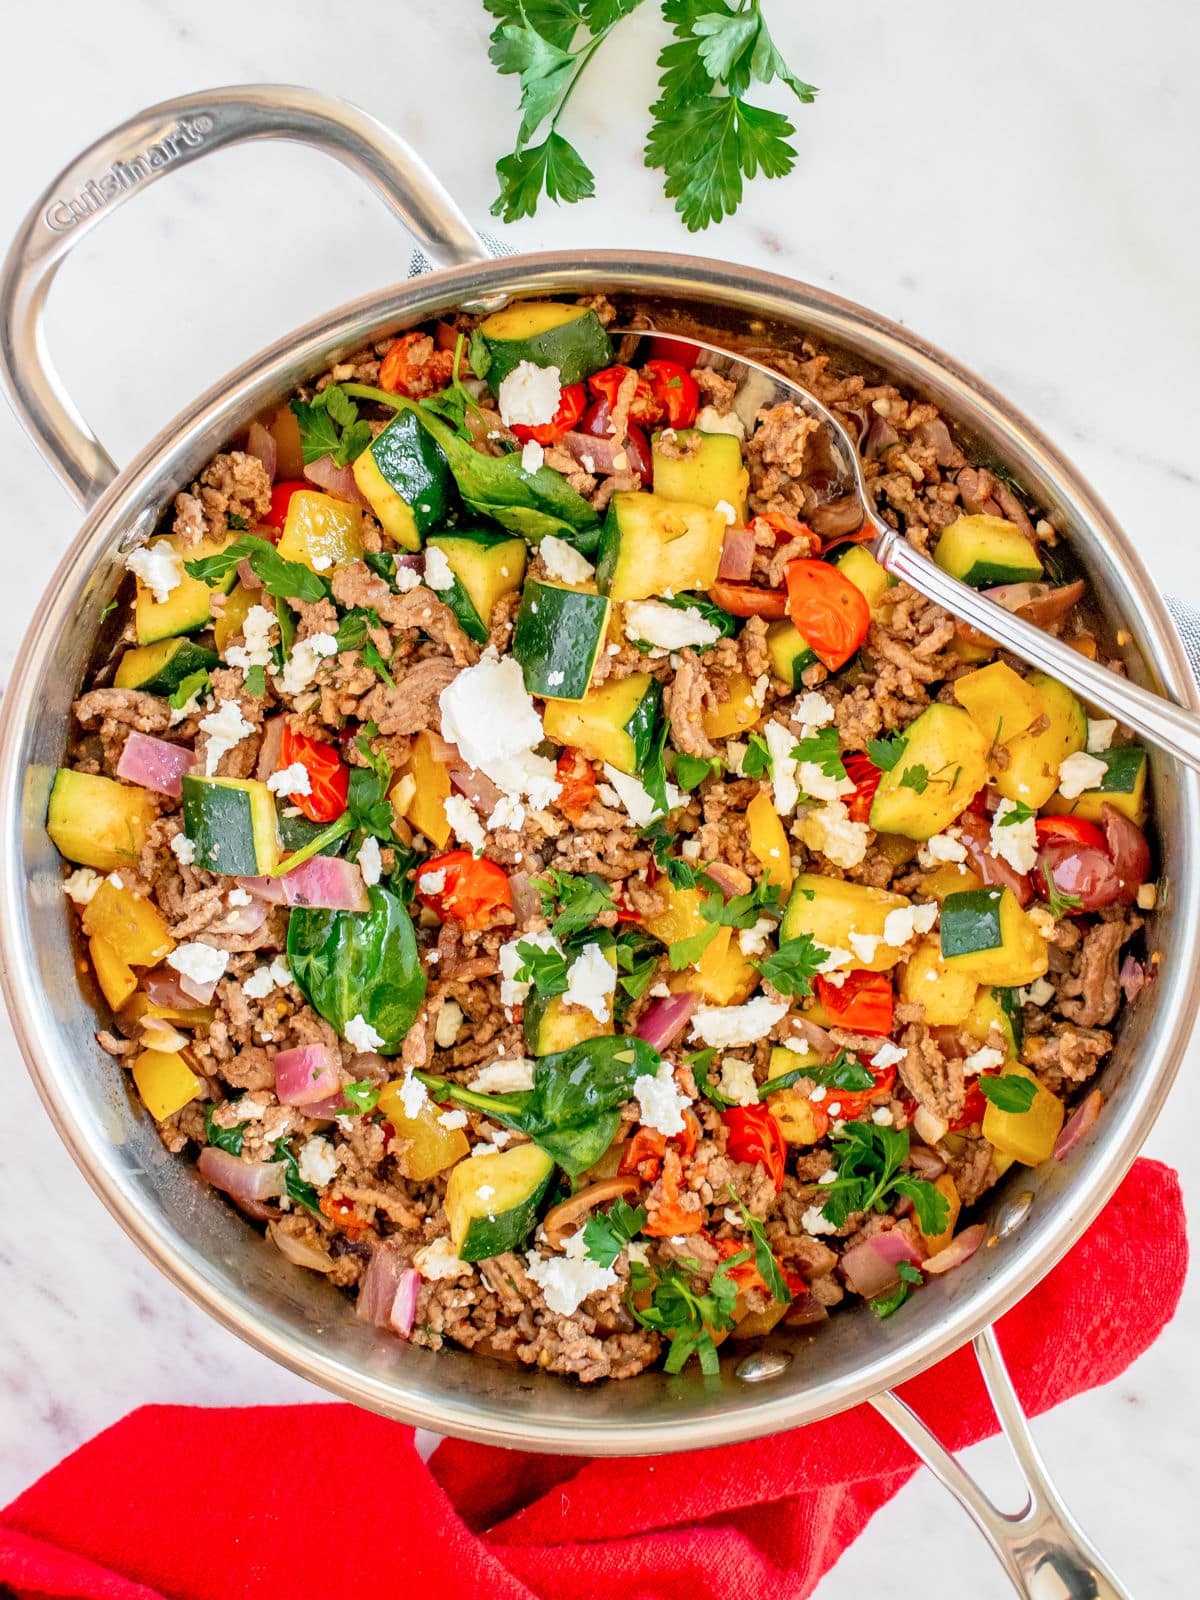 A colorful skillet meal with ground meat, diced vegetables, herbs, and crumbled cheese.